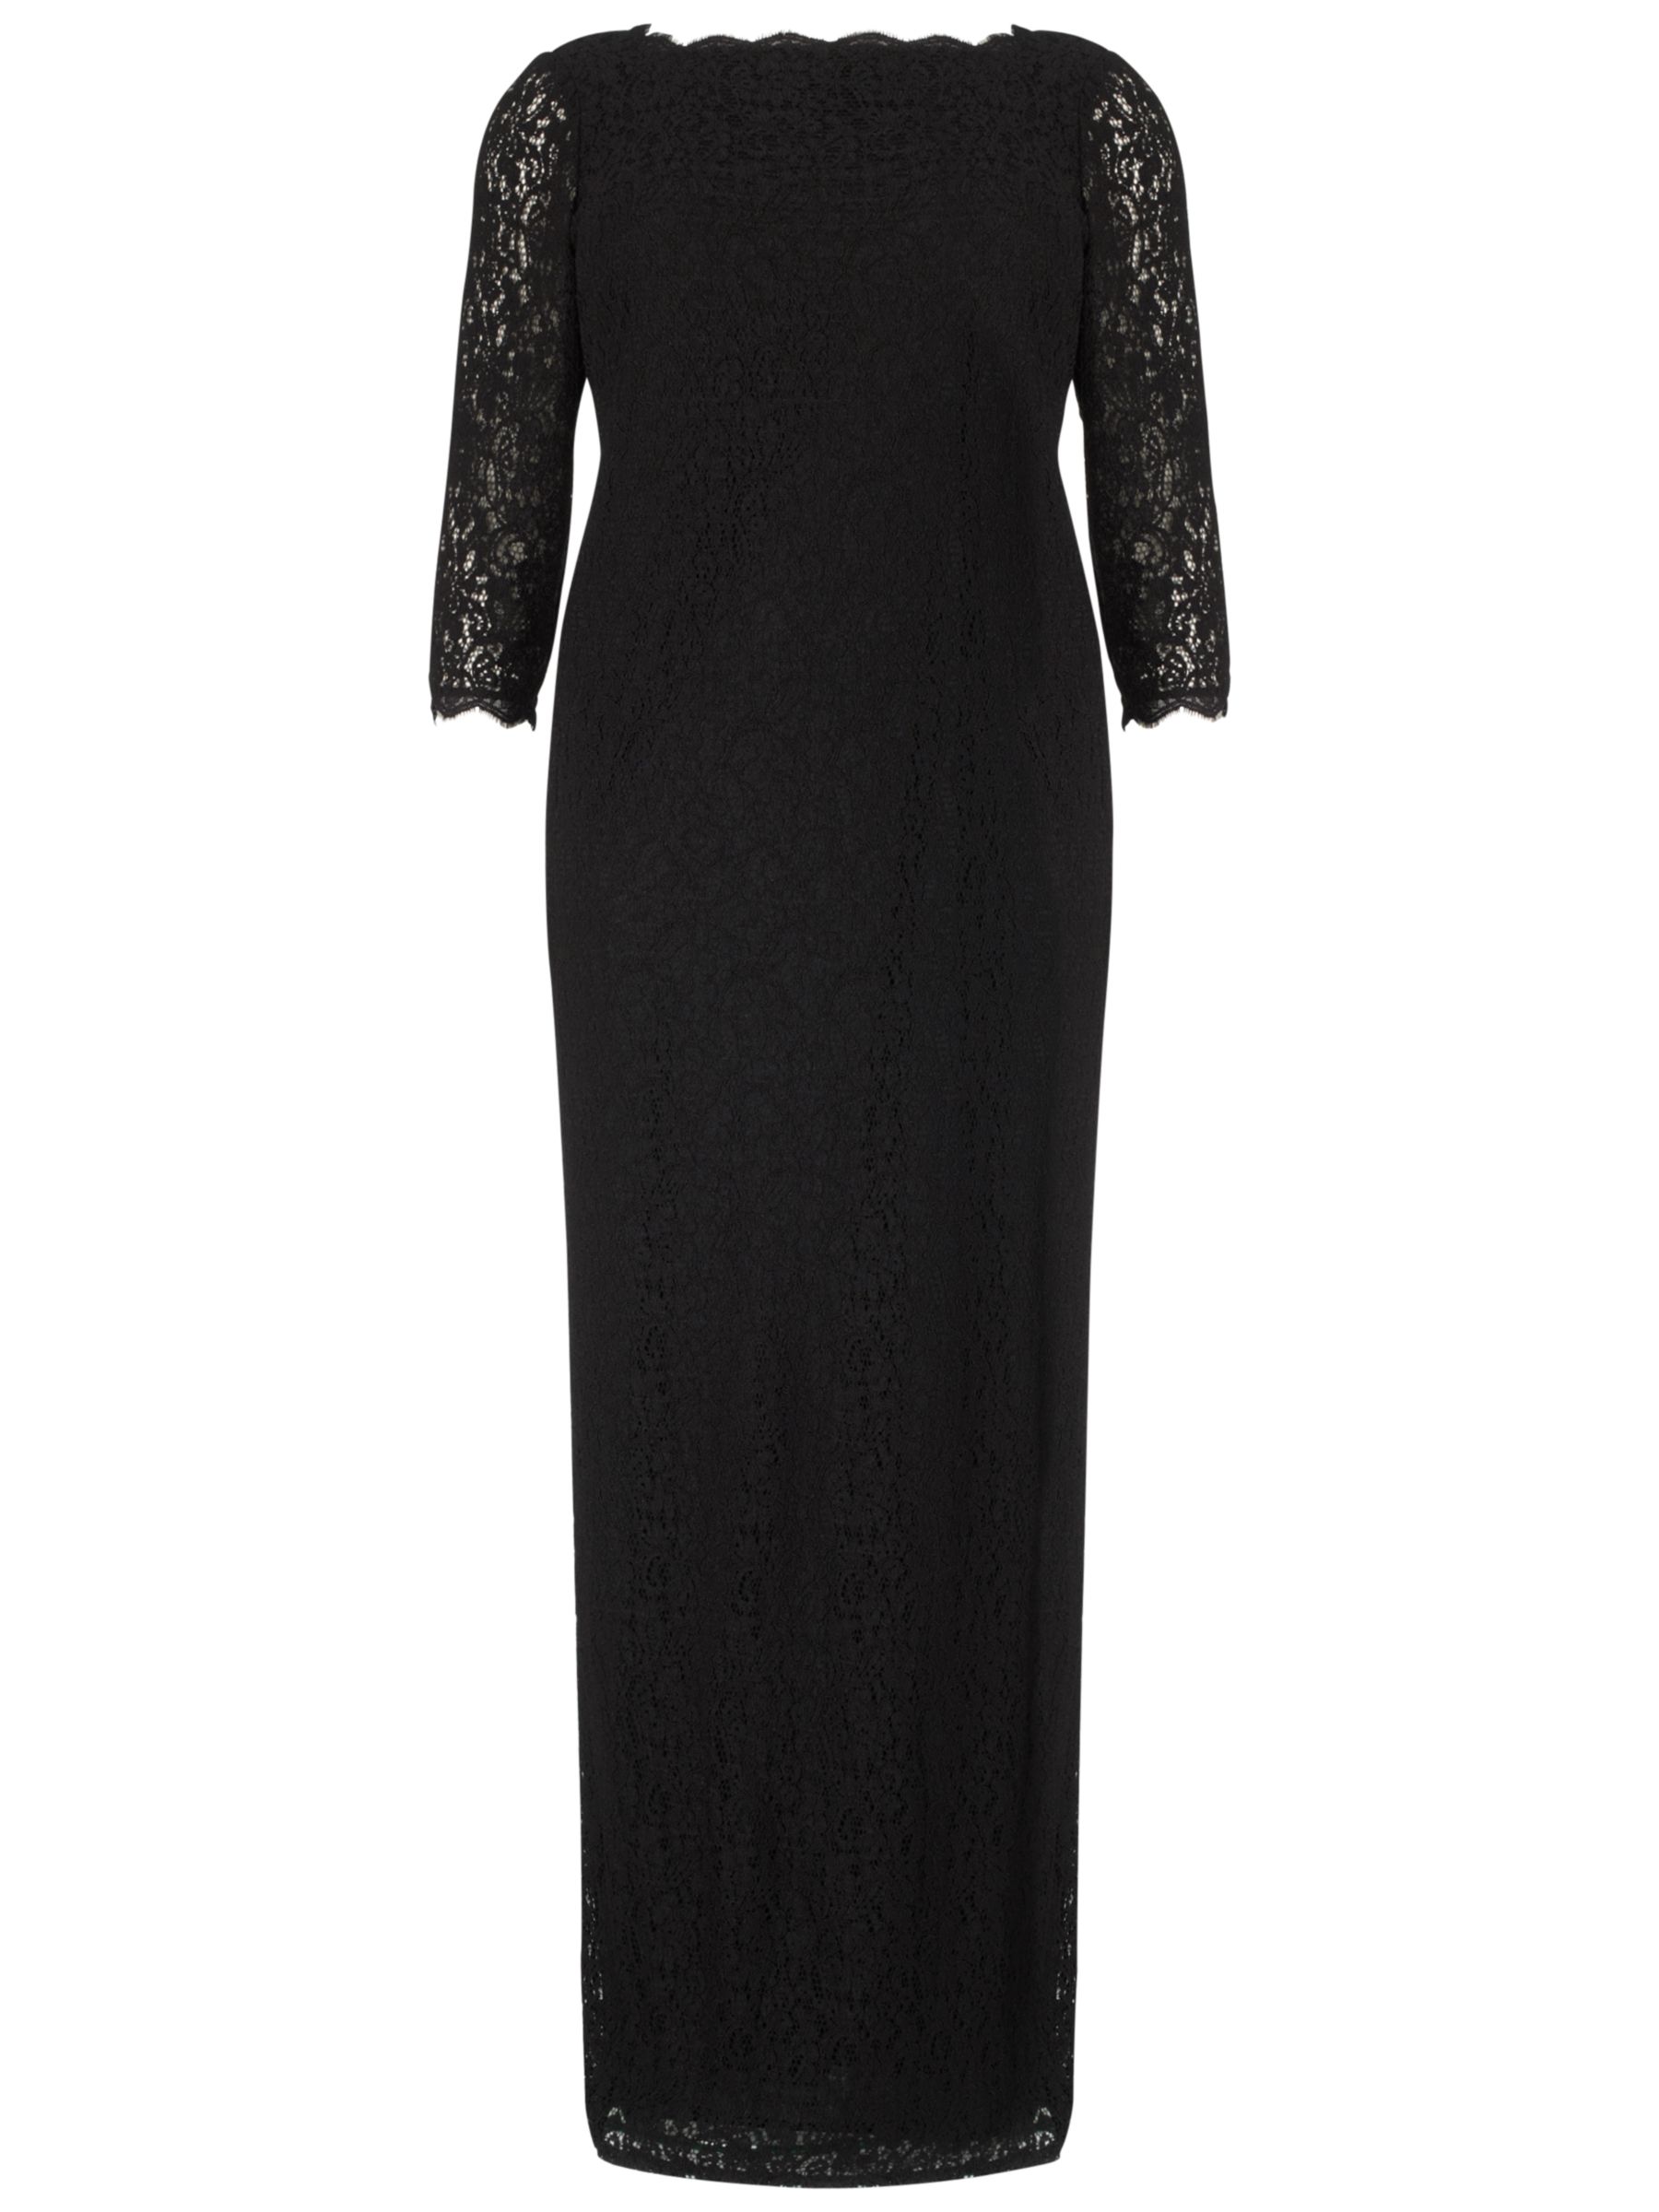 black dress size 18 with sleeves